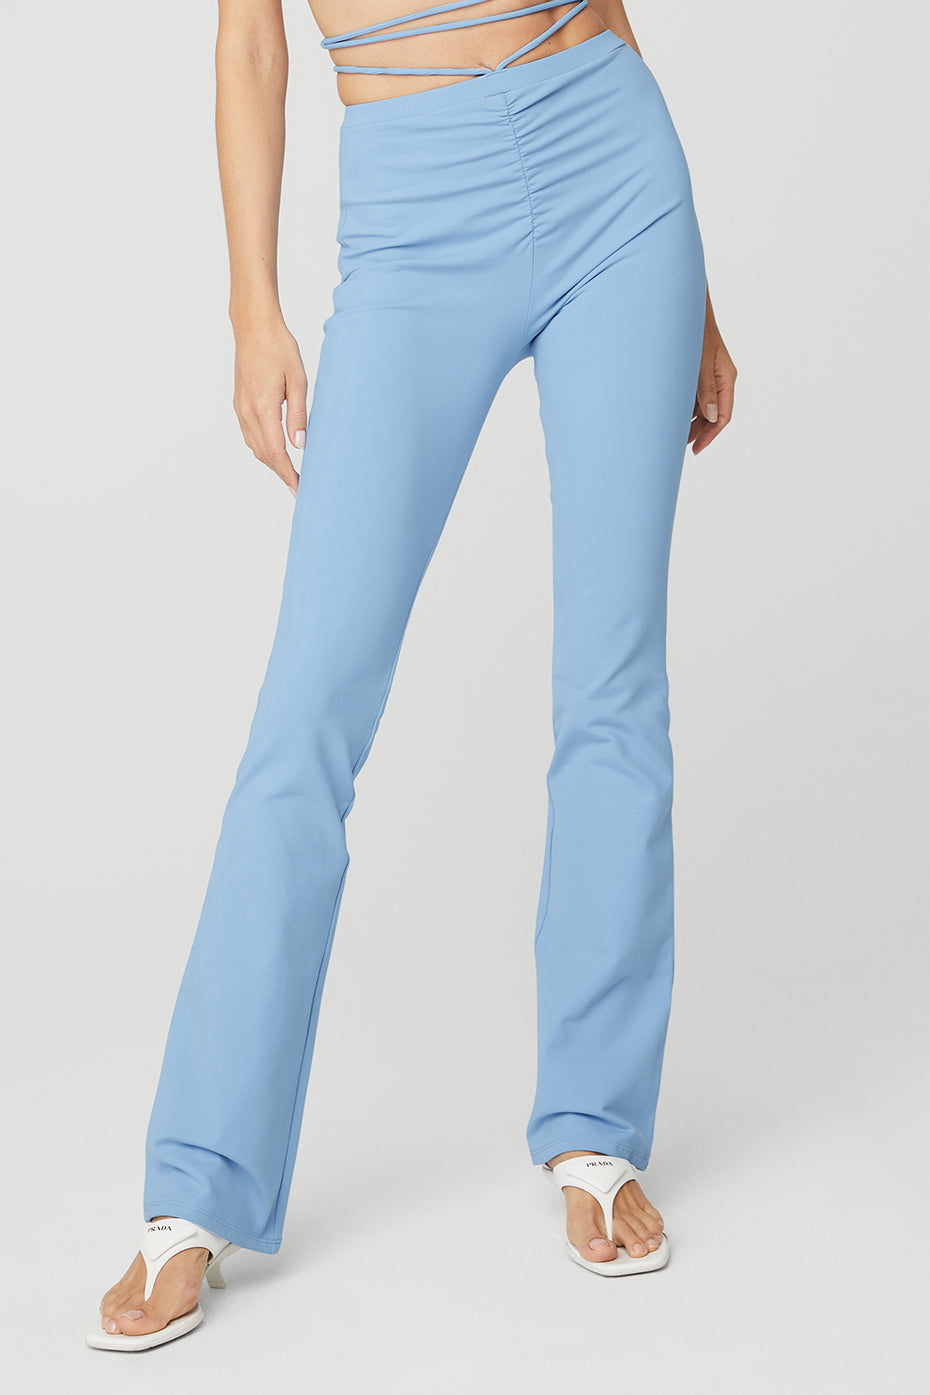 Airbrush High-Waist Cinch Flare Legging in Tile Blue by Alo Yoga - Work  Well Daily